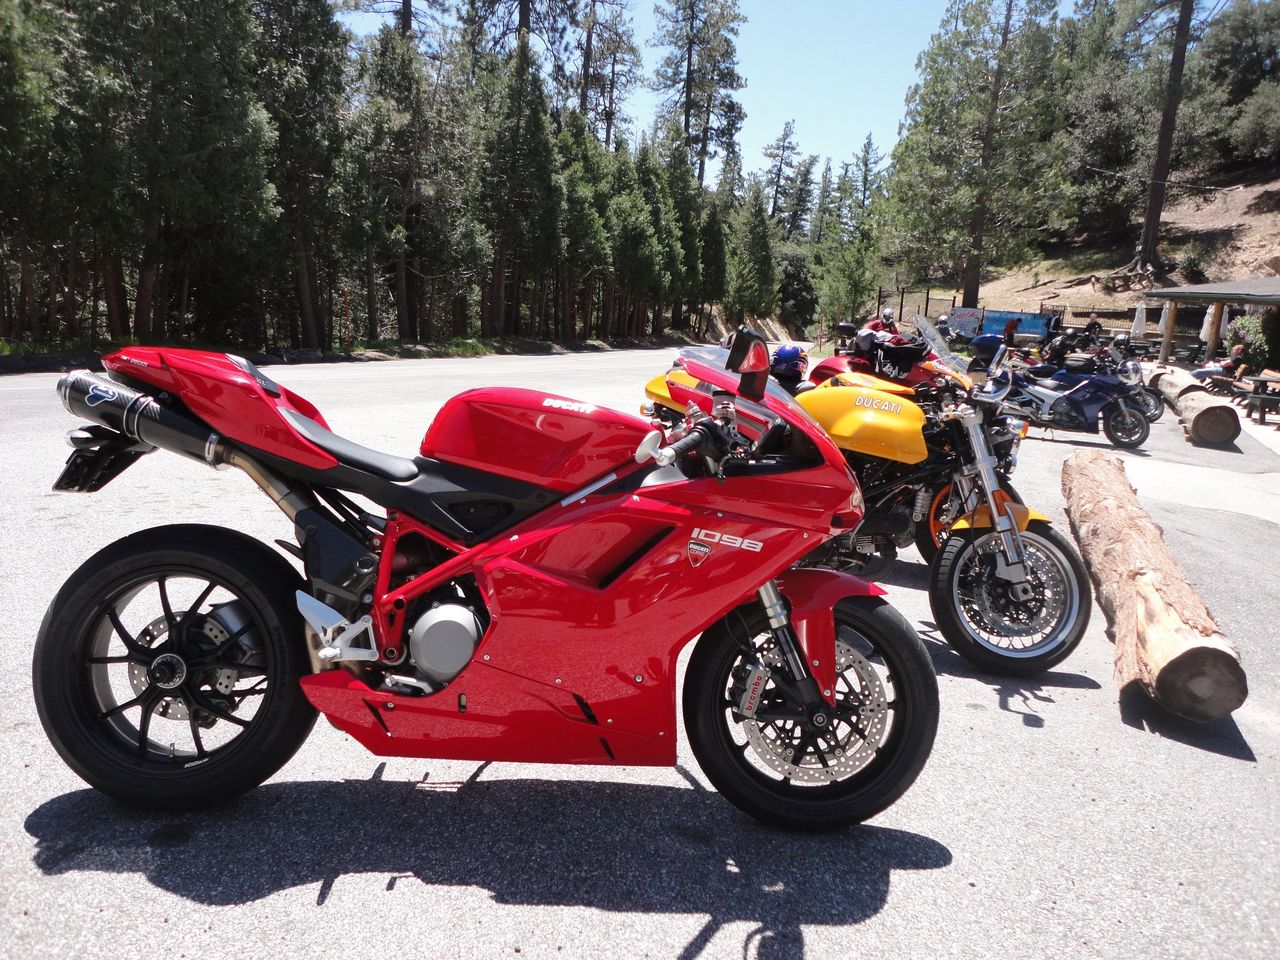 Ducati 1098 and other motorcycles in lot at Newcomb's Ranch